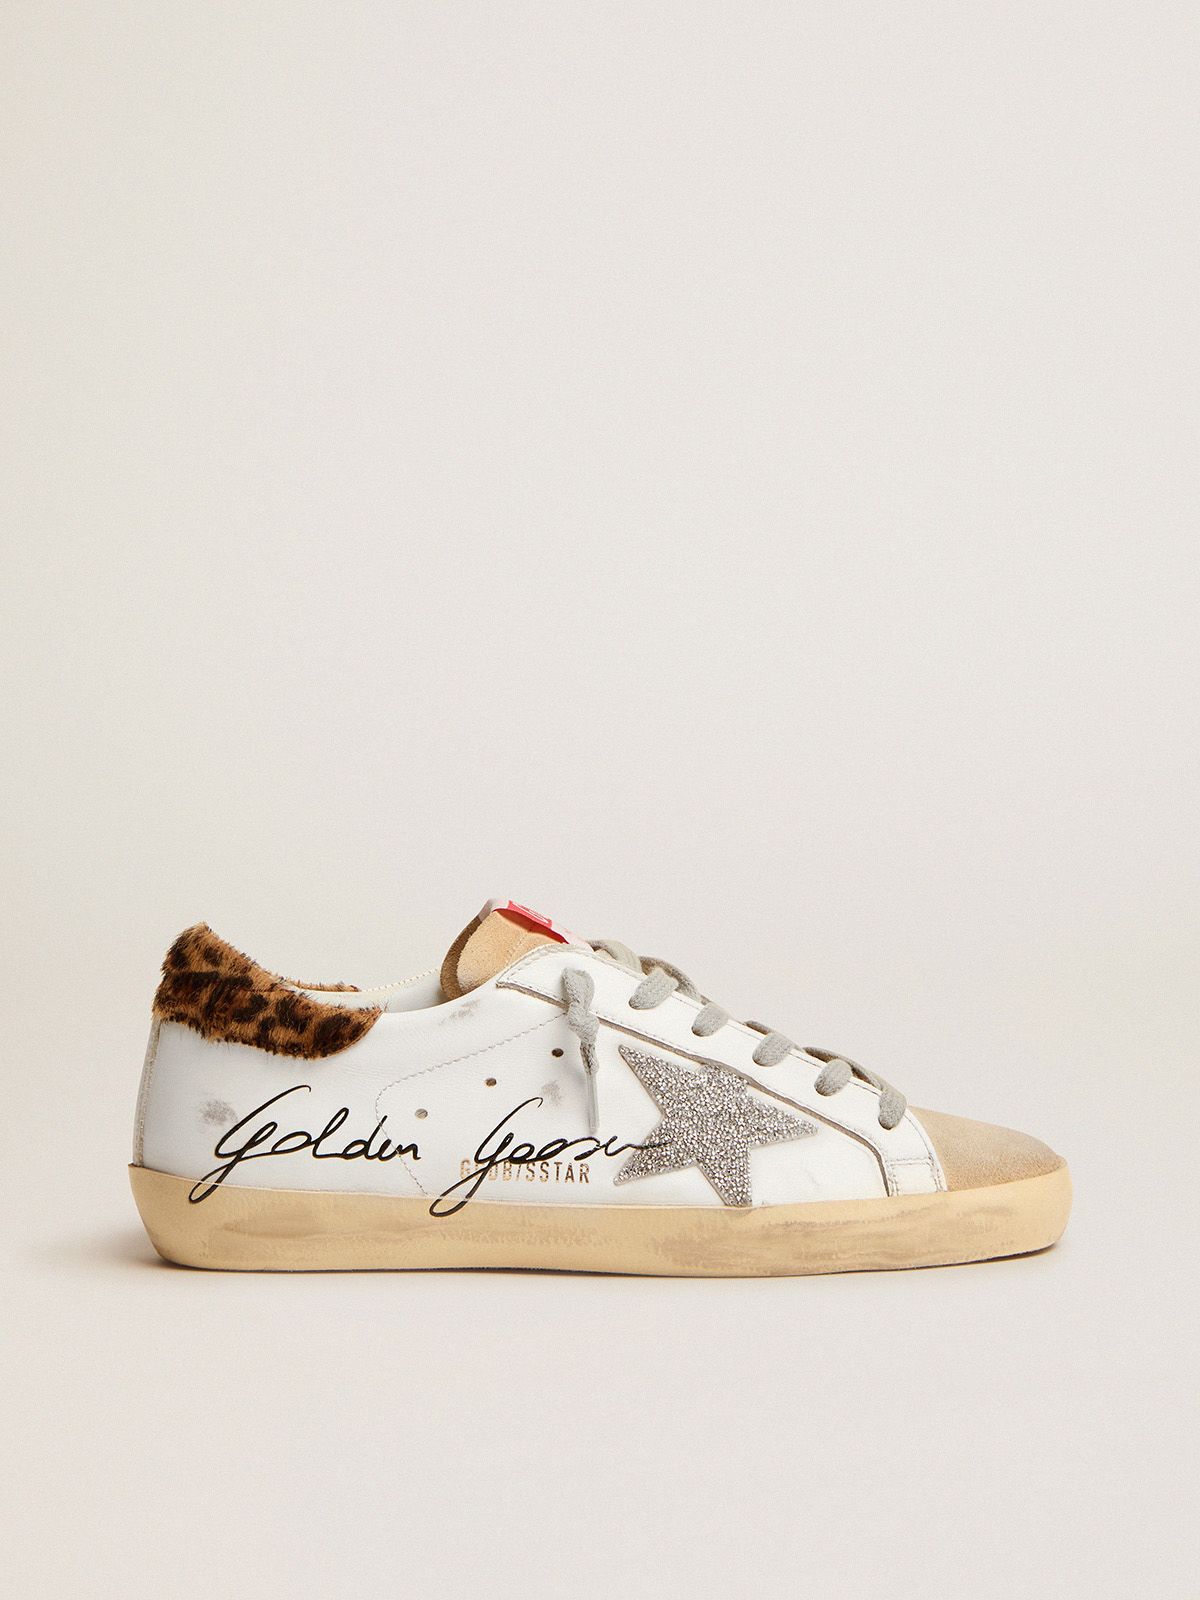 golden goose skin heel Swarovski and pony Super-Star with tab sneakers star leopard-print crystal